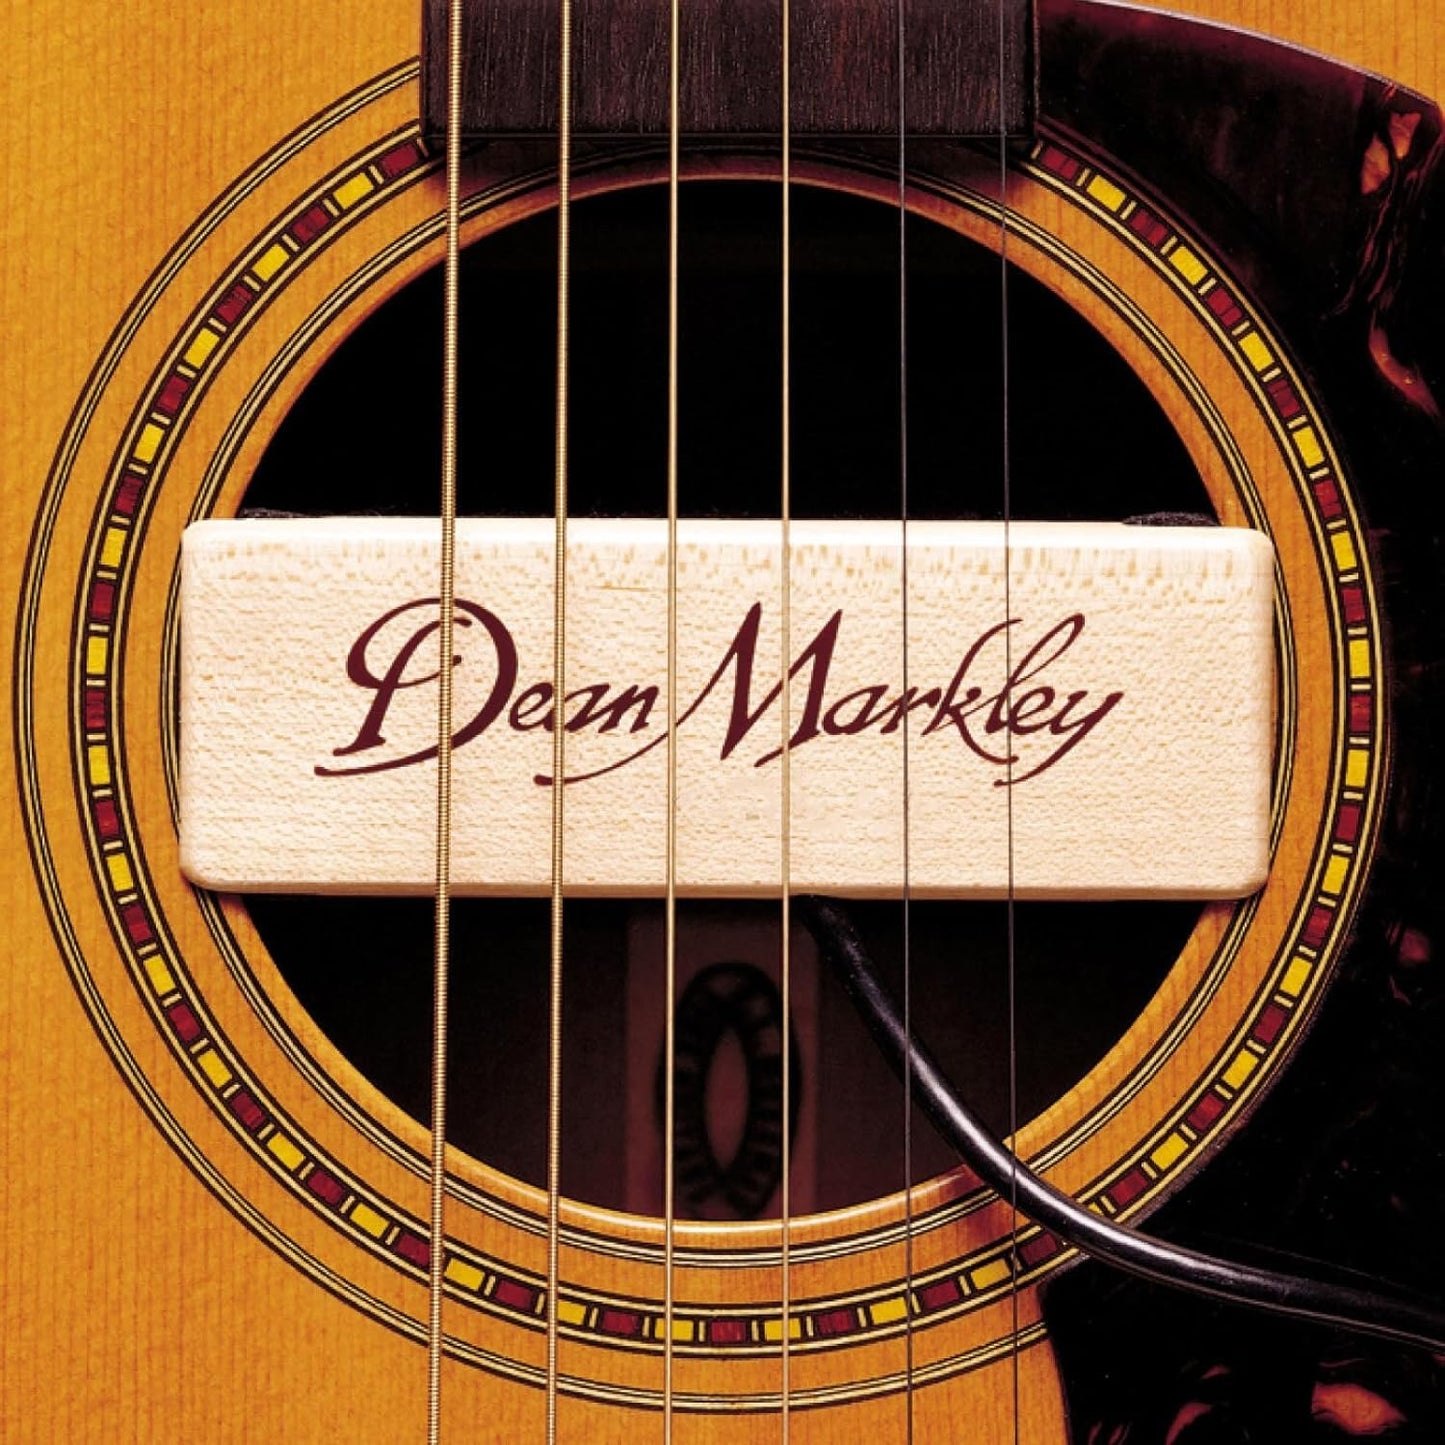 Dean Markley Pro Mag Plus Acoustic Guitar Single Coil Pickup, Smooth Maple Wood Design Active Soundhole Pickup Ebony Finish, Perfect String Balance and 15 Ft Low Noise for Steel-String Guitars